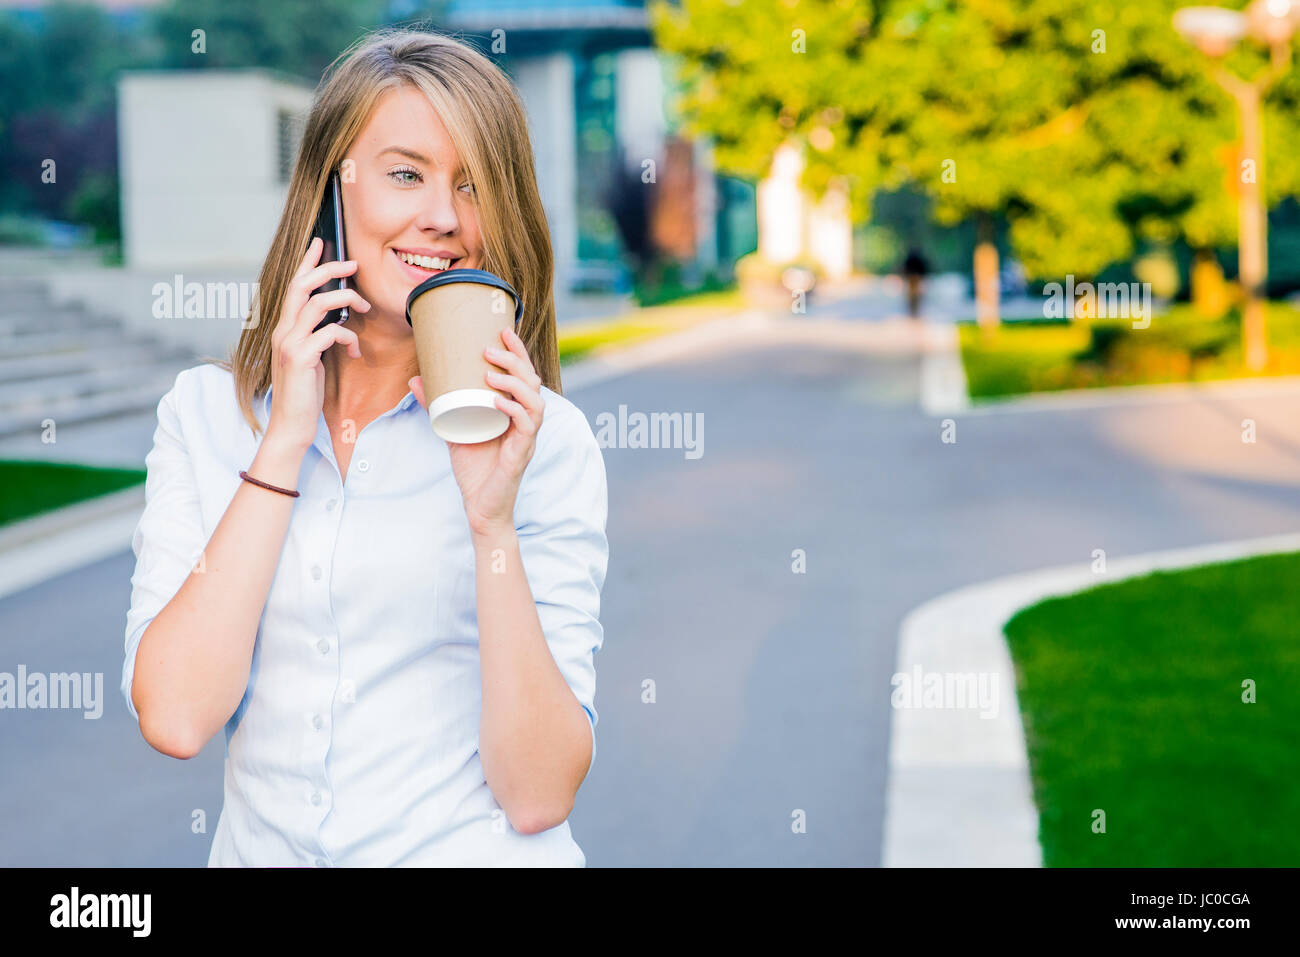 City lifestyle business woman using smartphone. Young professional female businesswoman on smart phone Stock Photo